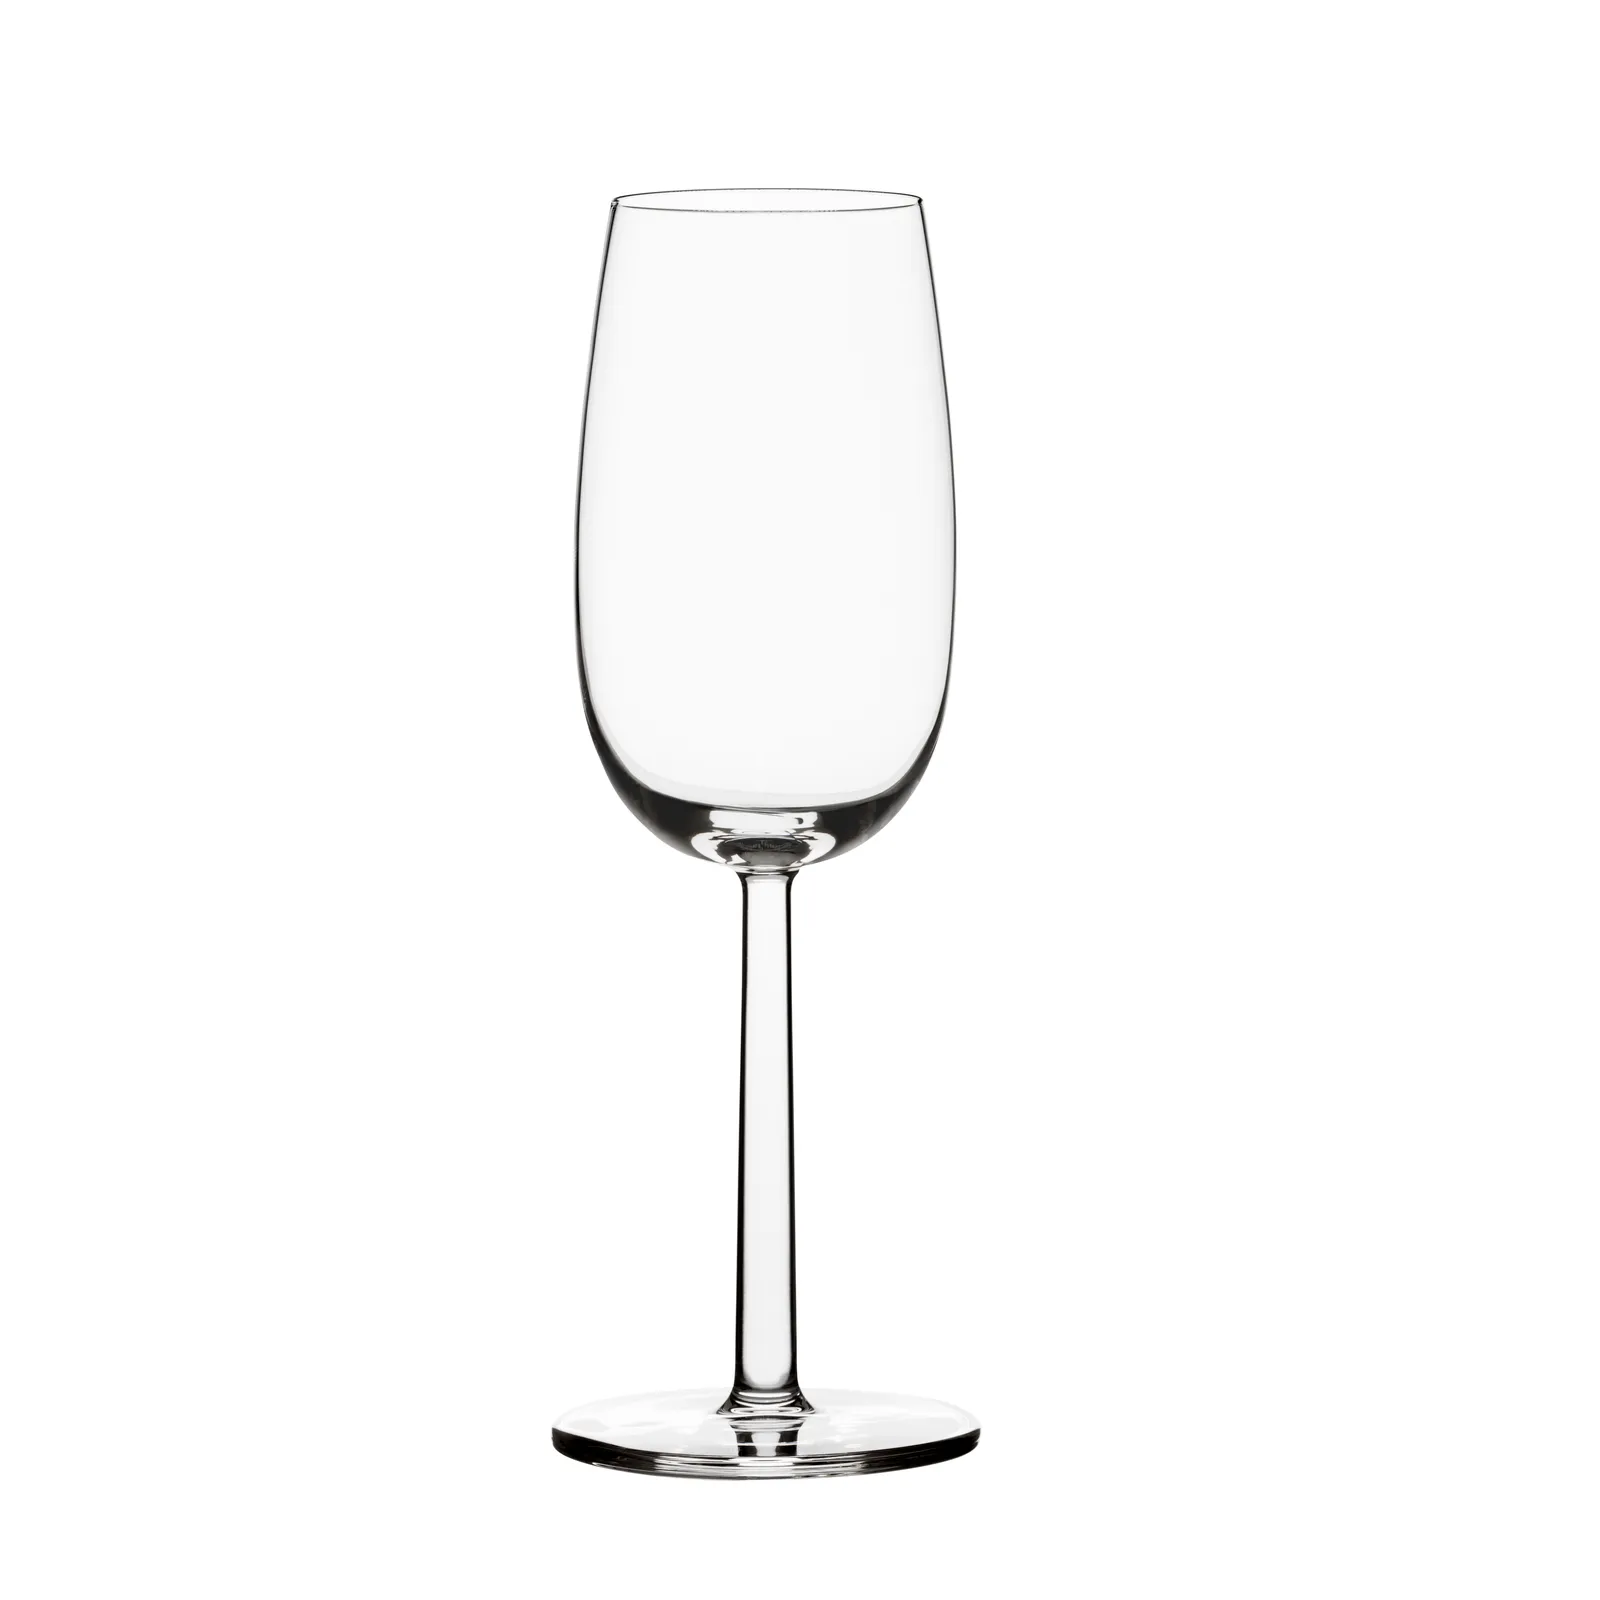 Raami bicchiere spumante Iittala 24 cl